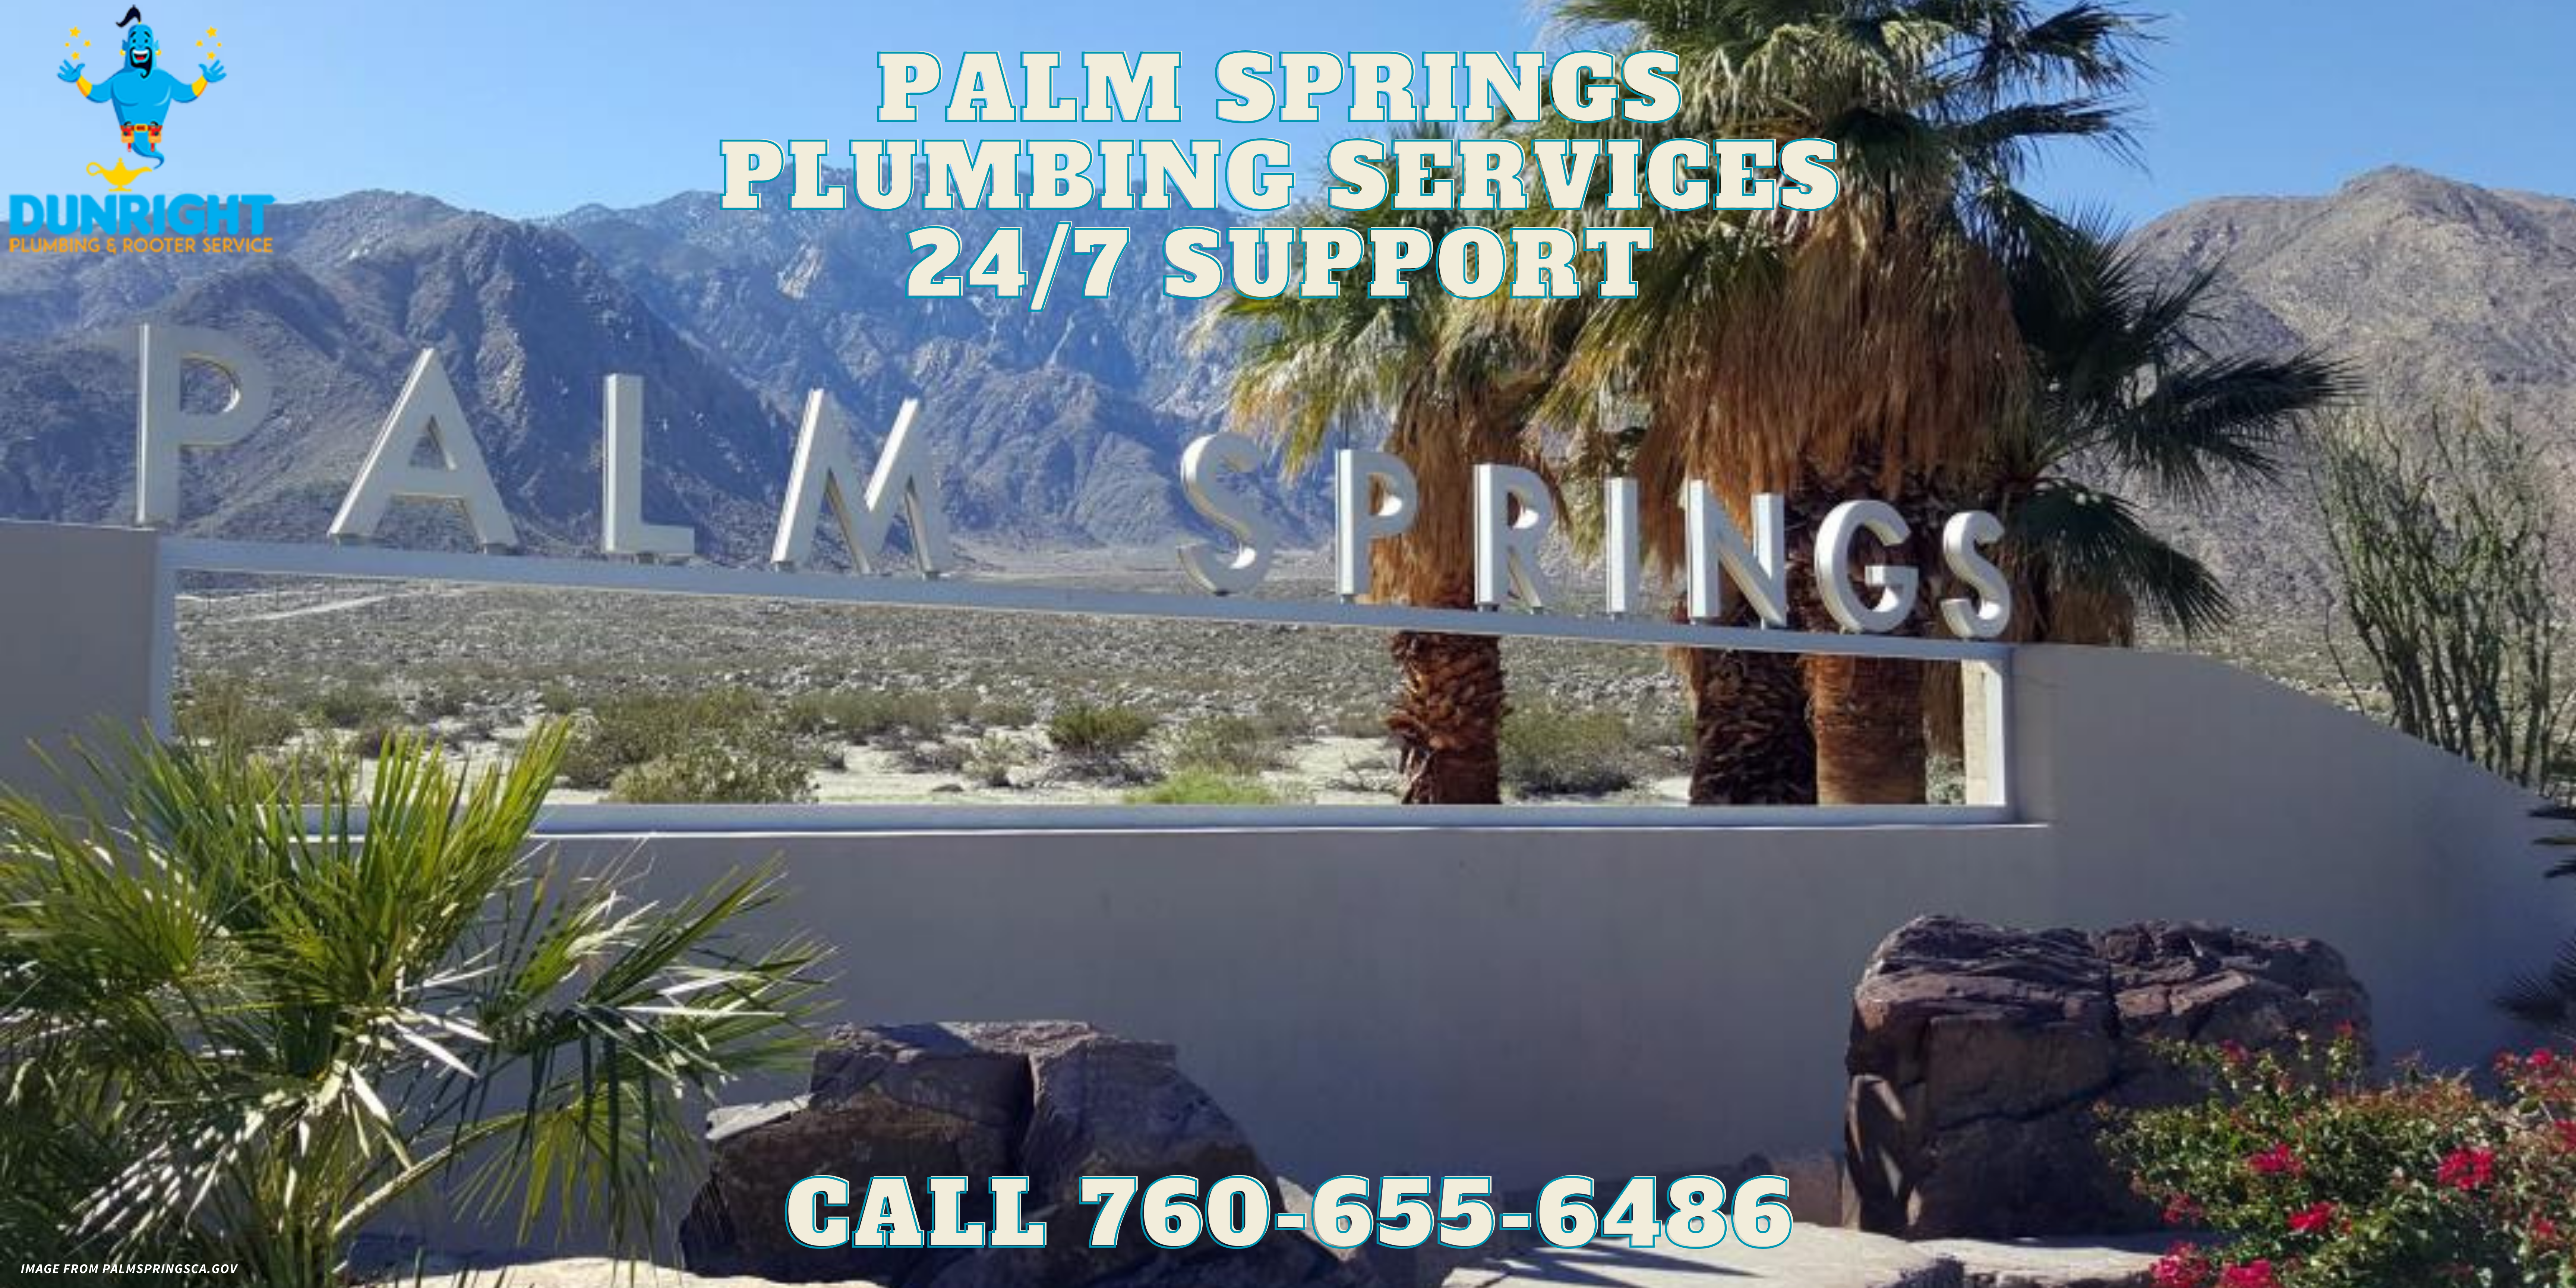 Palm Springs Plumbing Services